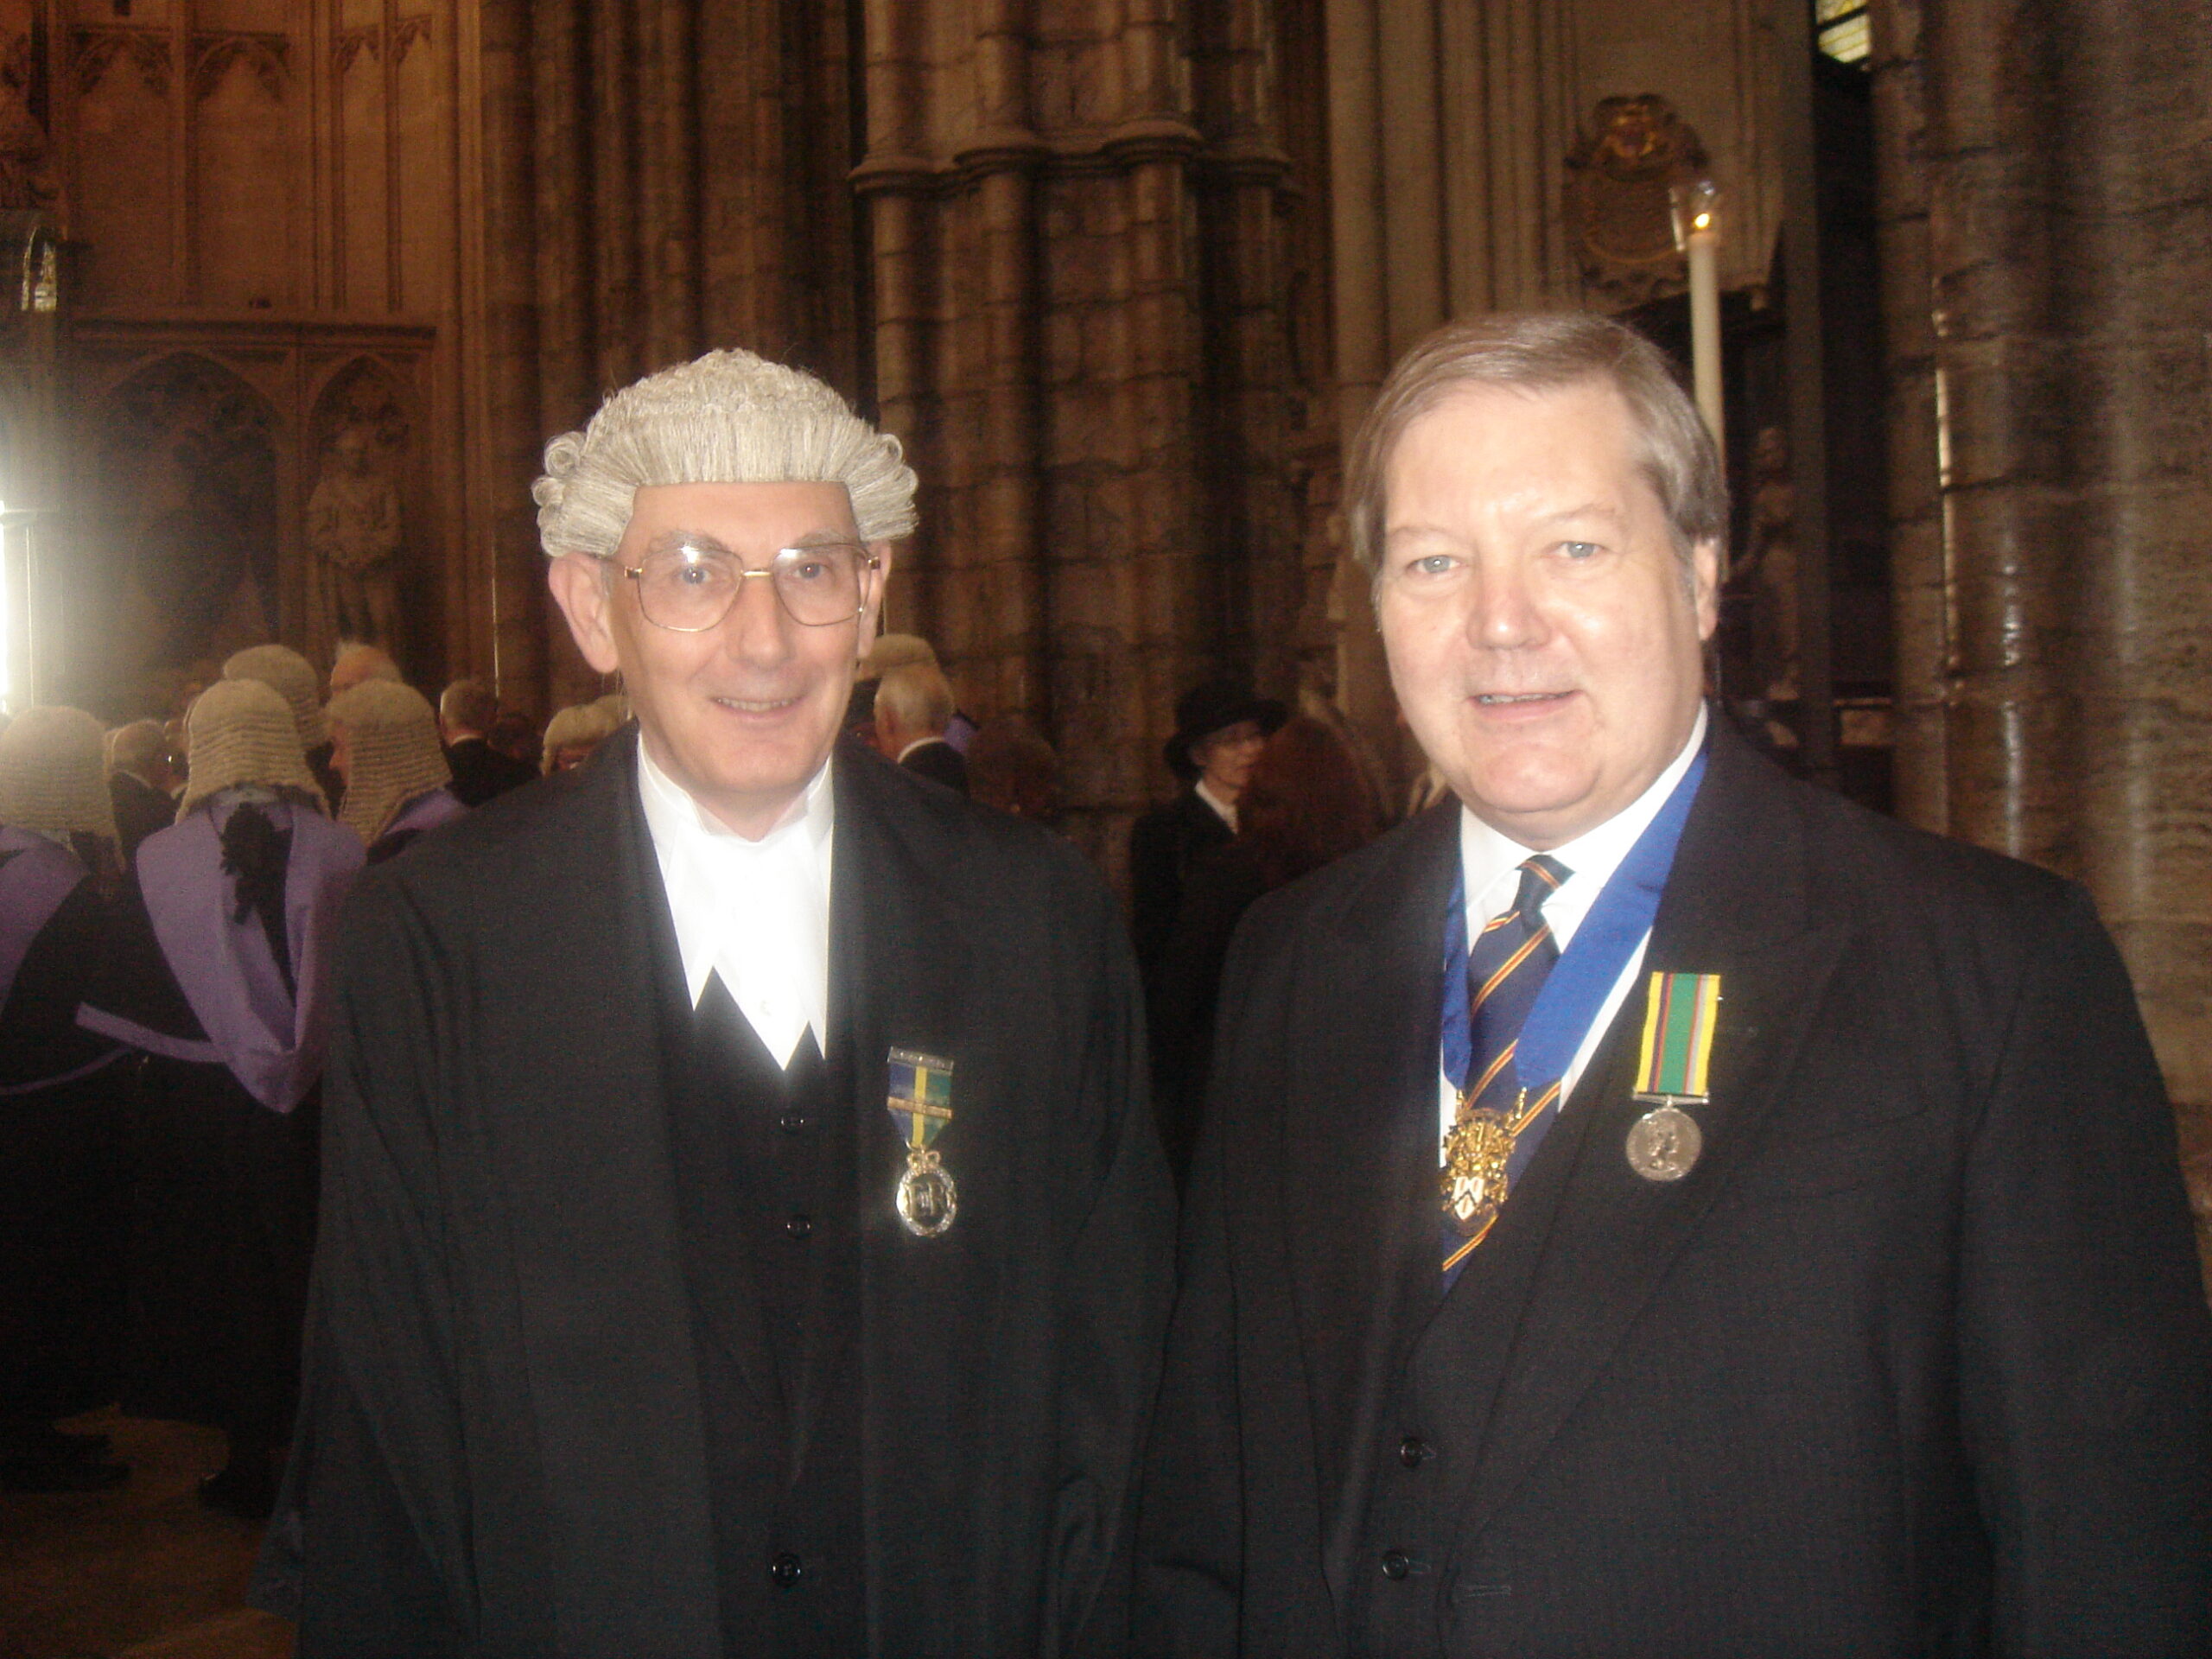 With District Judge Jhn Mainwaring-Taylor at the Lord Chancellor's service in Westminster Abbey